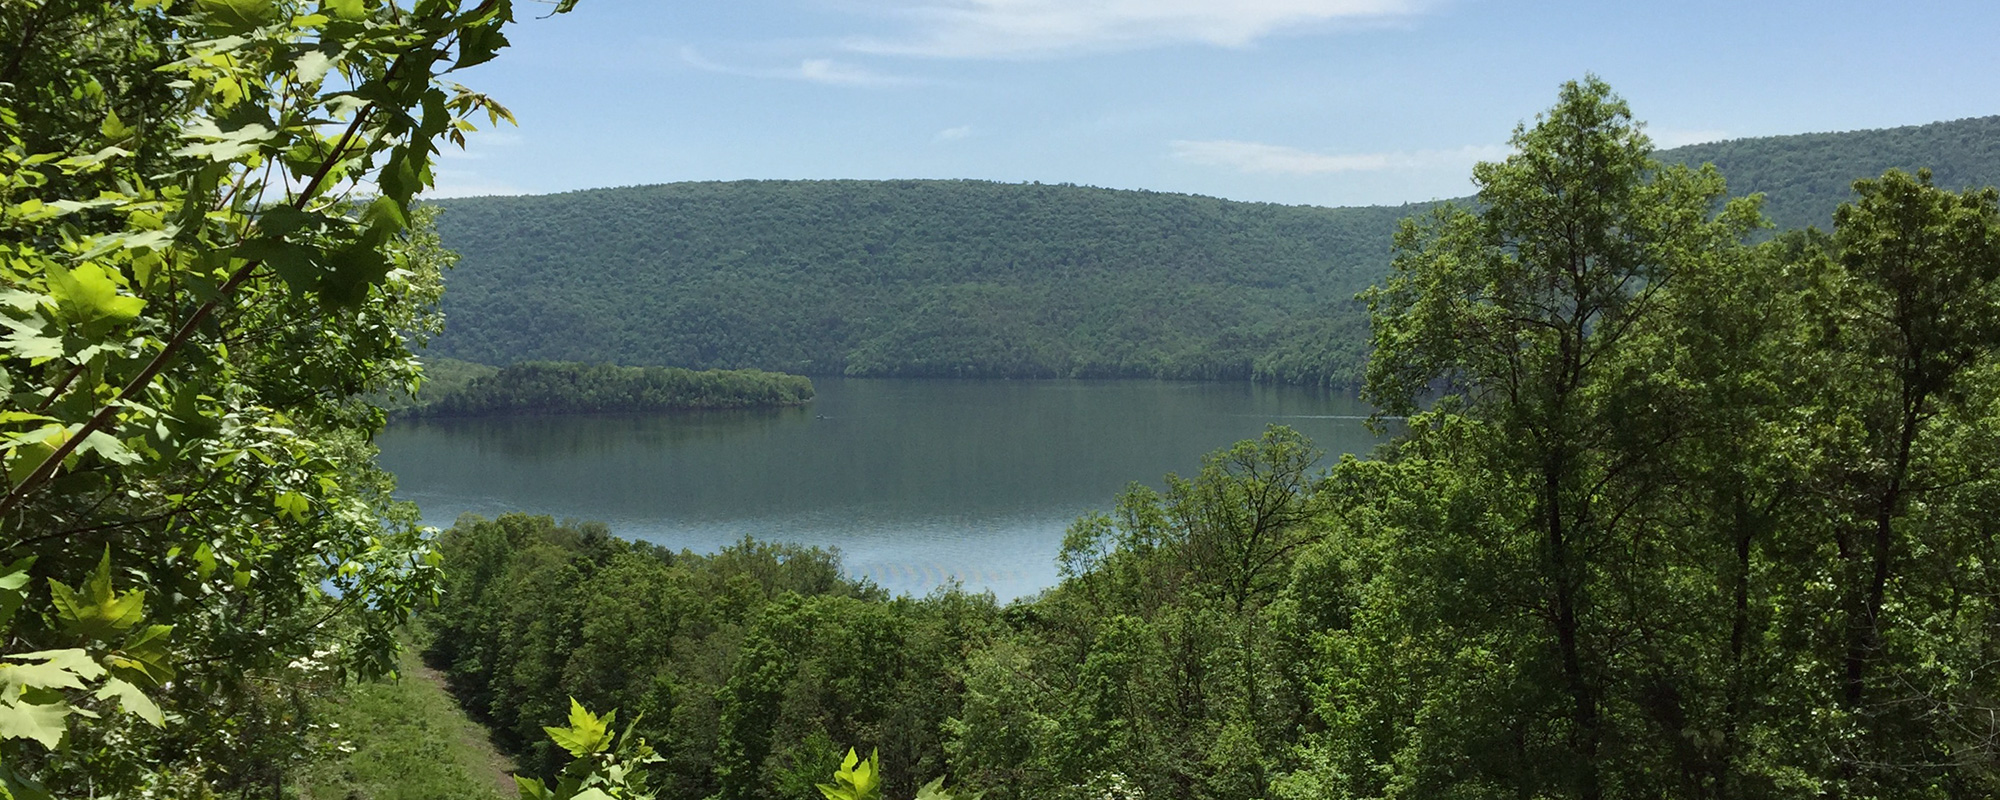 View of Raystown Lake from the hill above